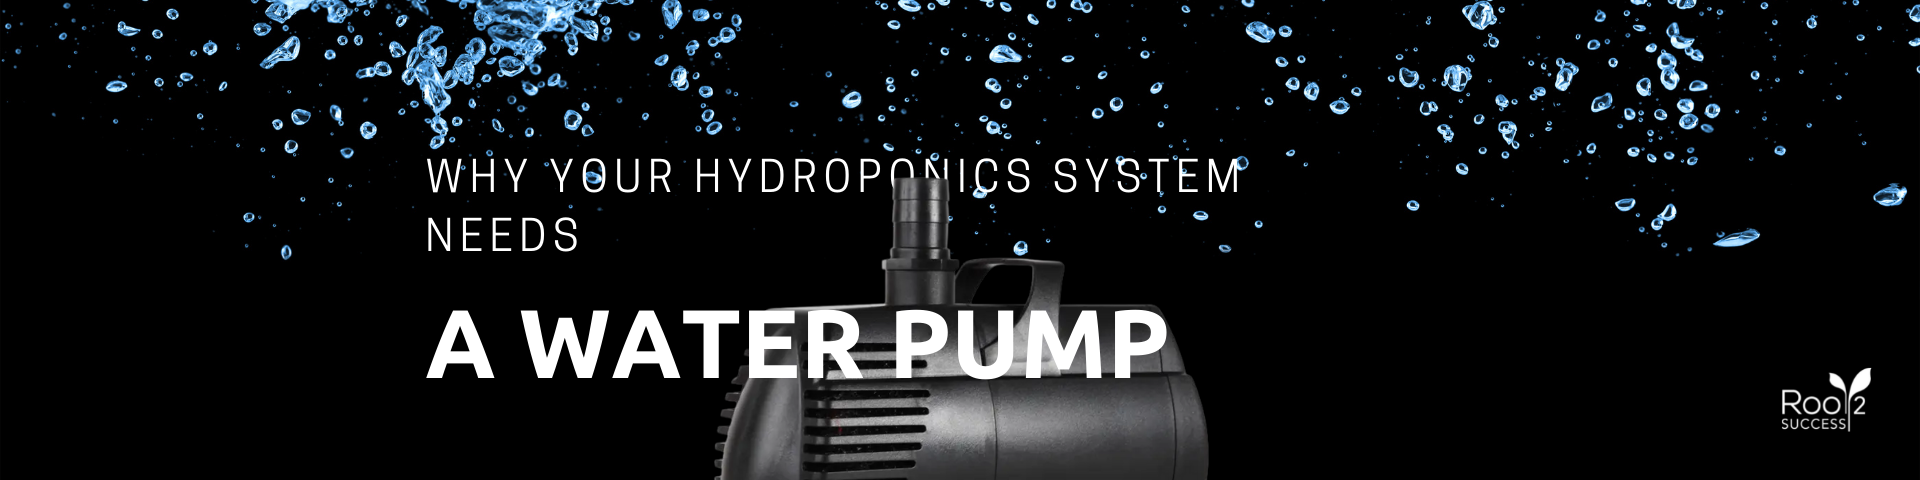 Why your hydroponics system needs a water pump